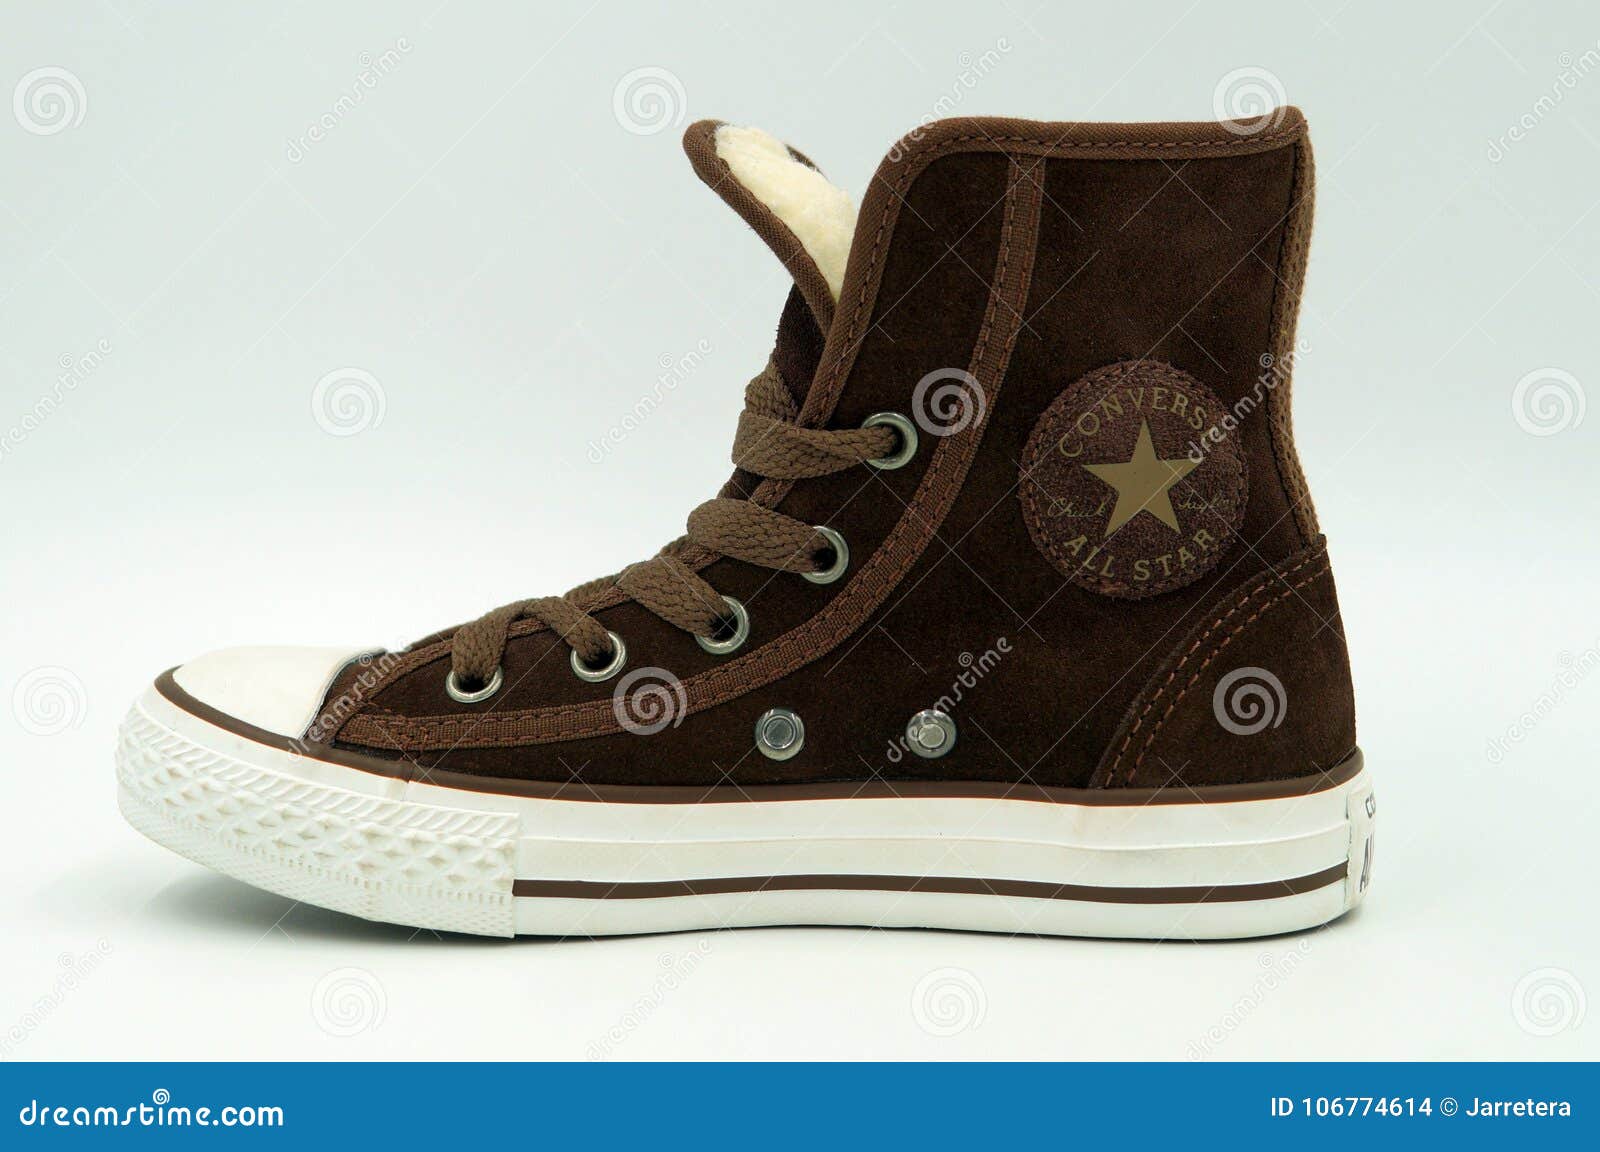 Converse All Stars Sneaker Editorial Image - Image of logo: 106774614